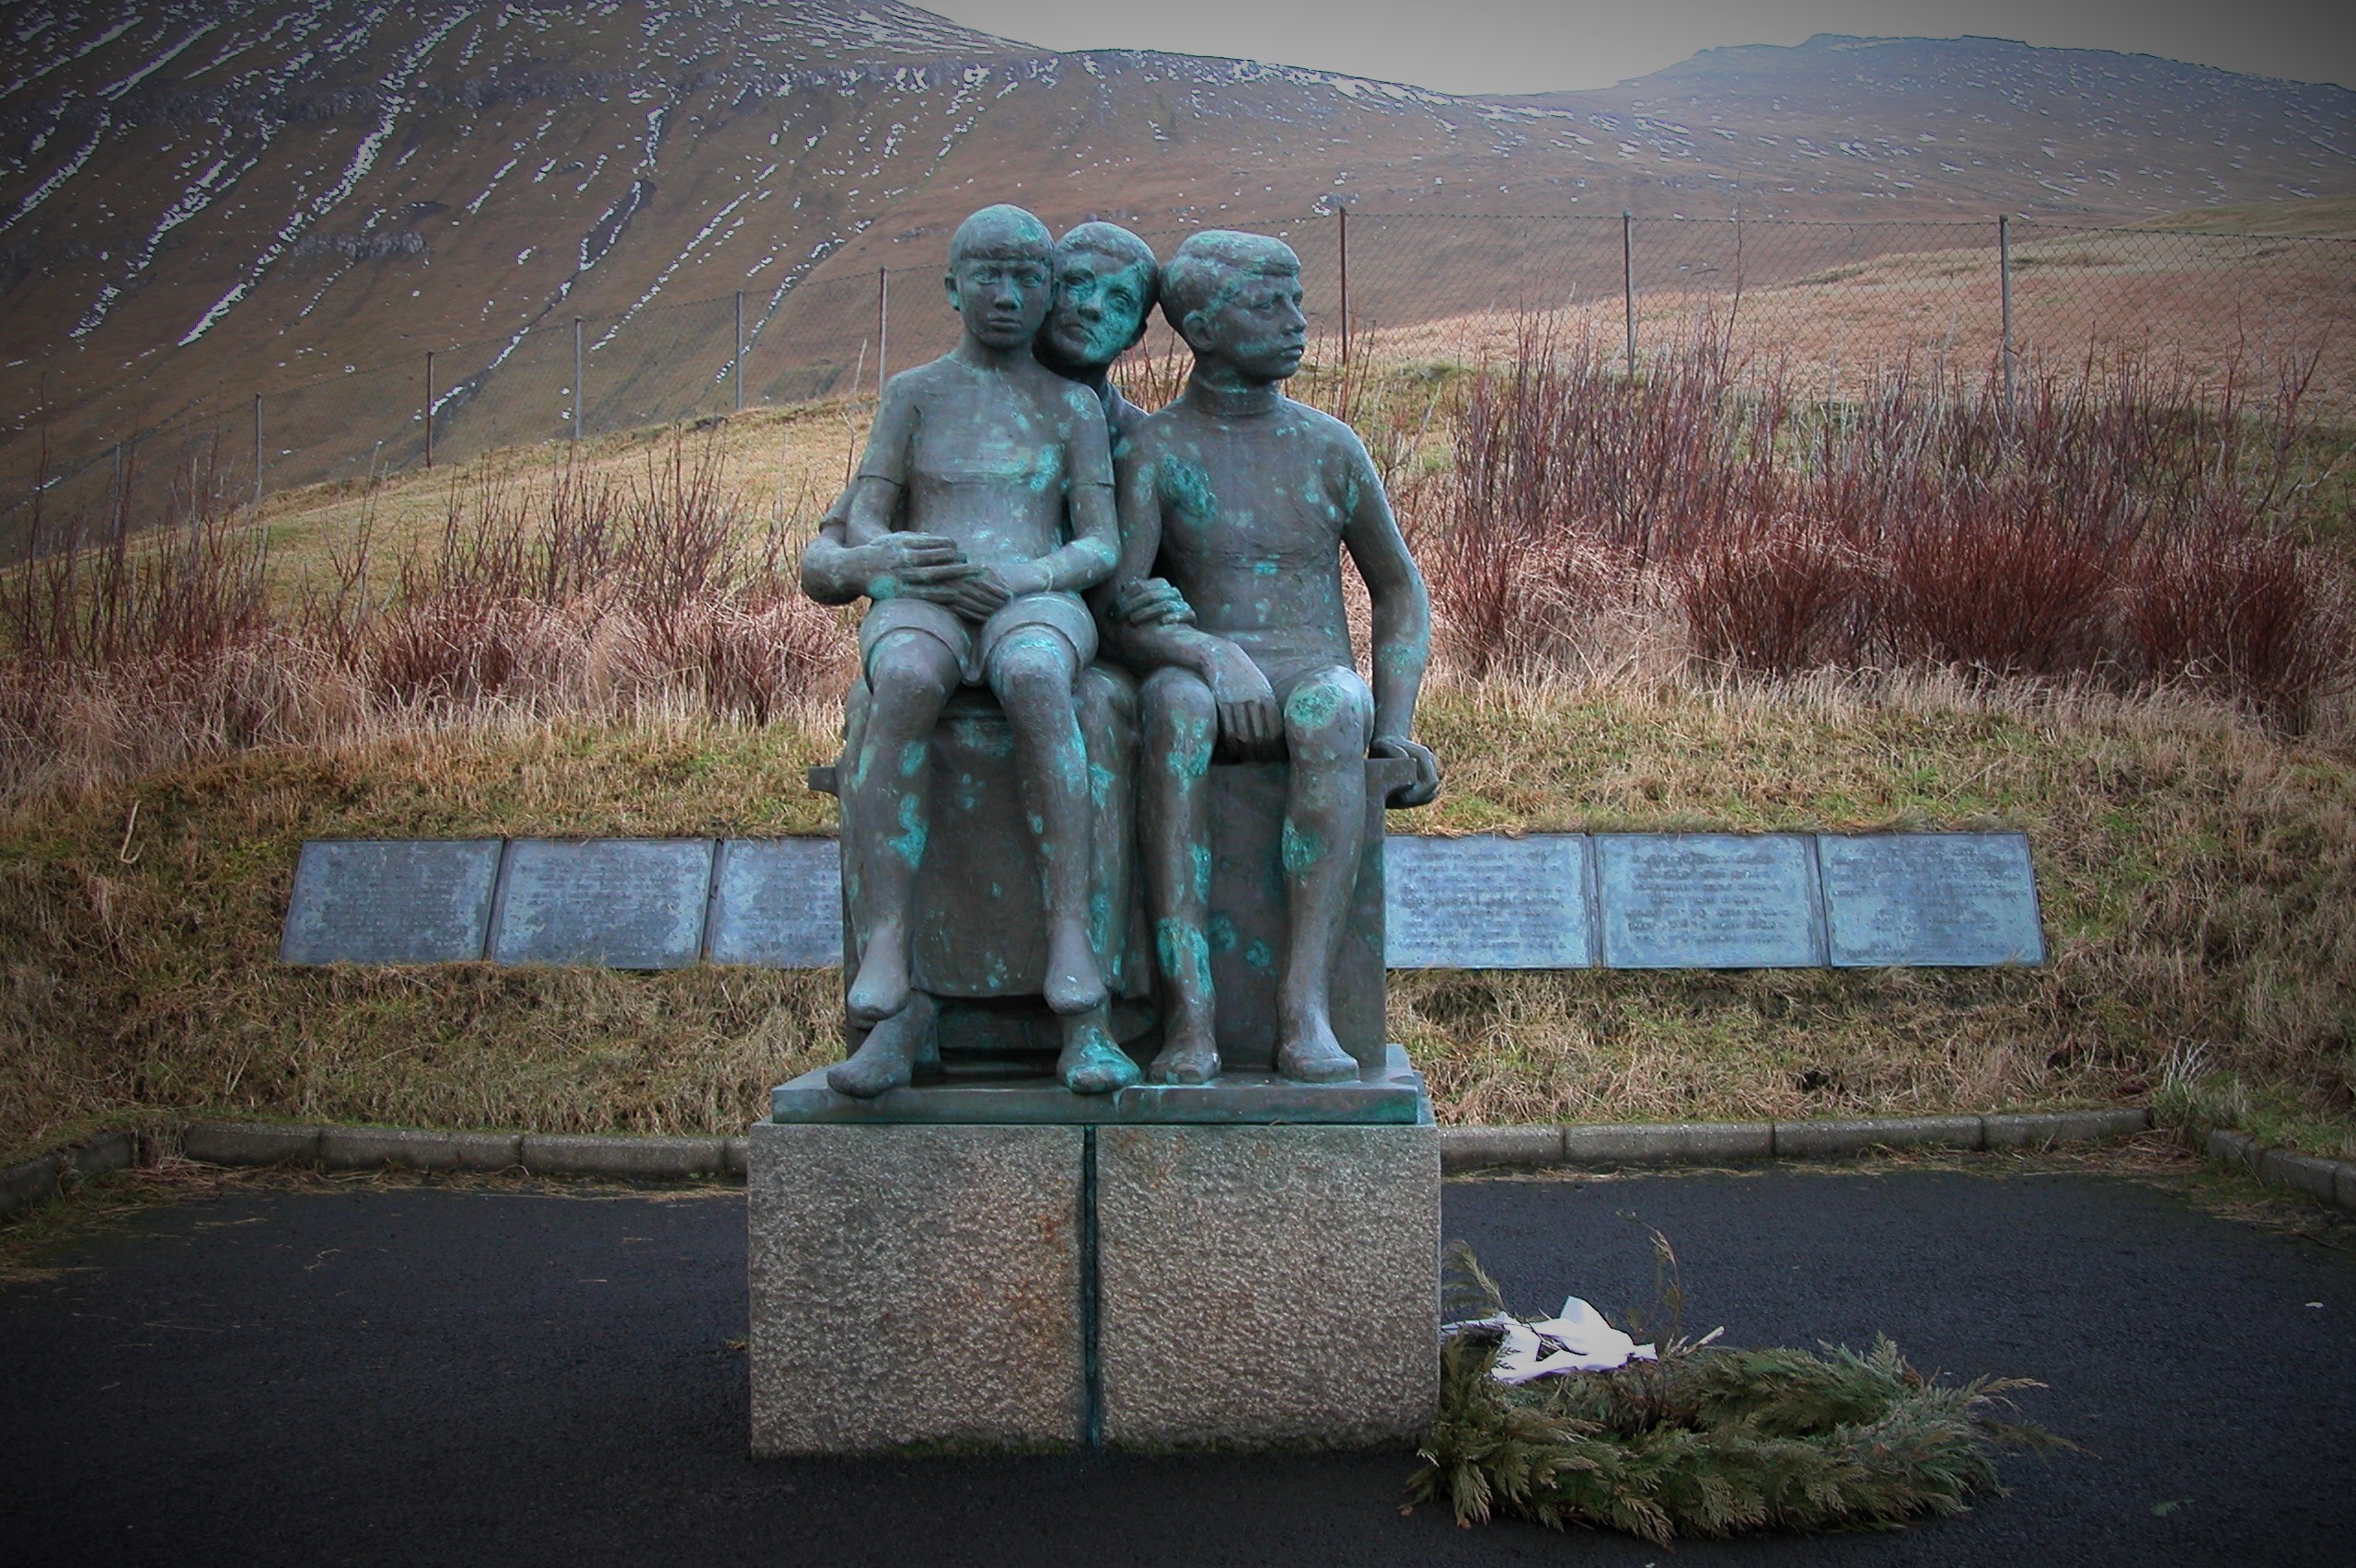 Near the church in Gjógv, Faroe Islands, a sculpture stands as a memorial to fishermen lost at sea. Photo taken on January 19, 2006.